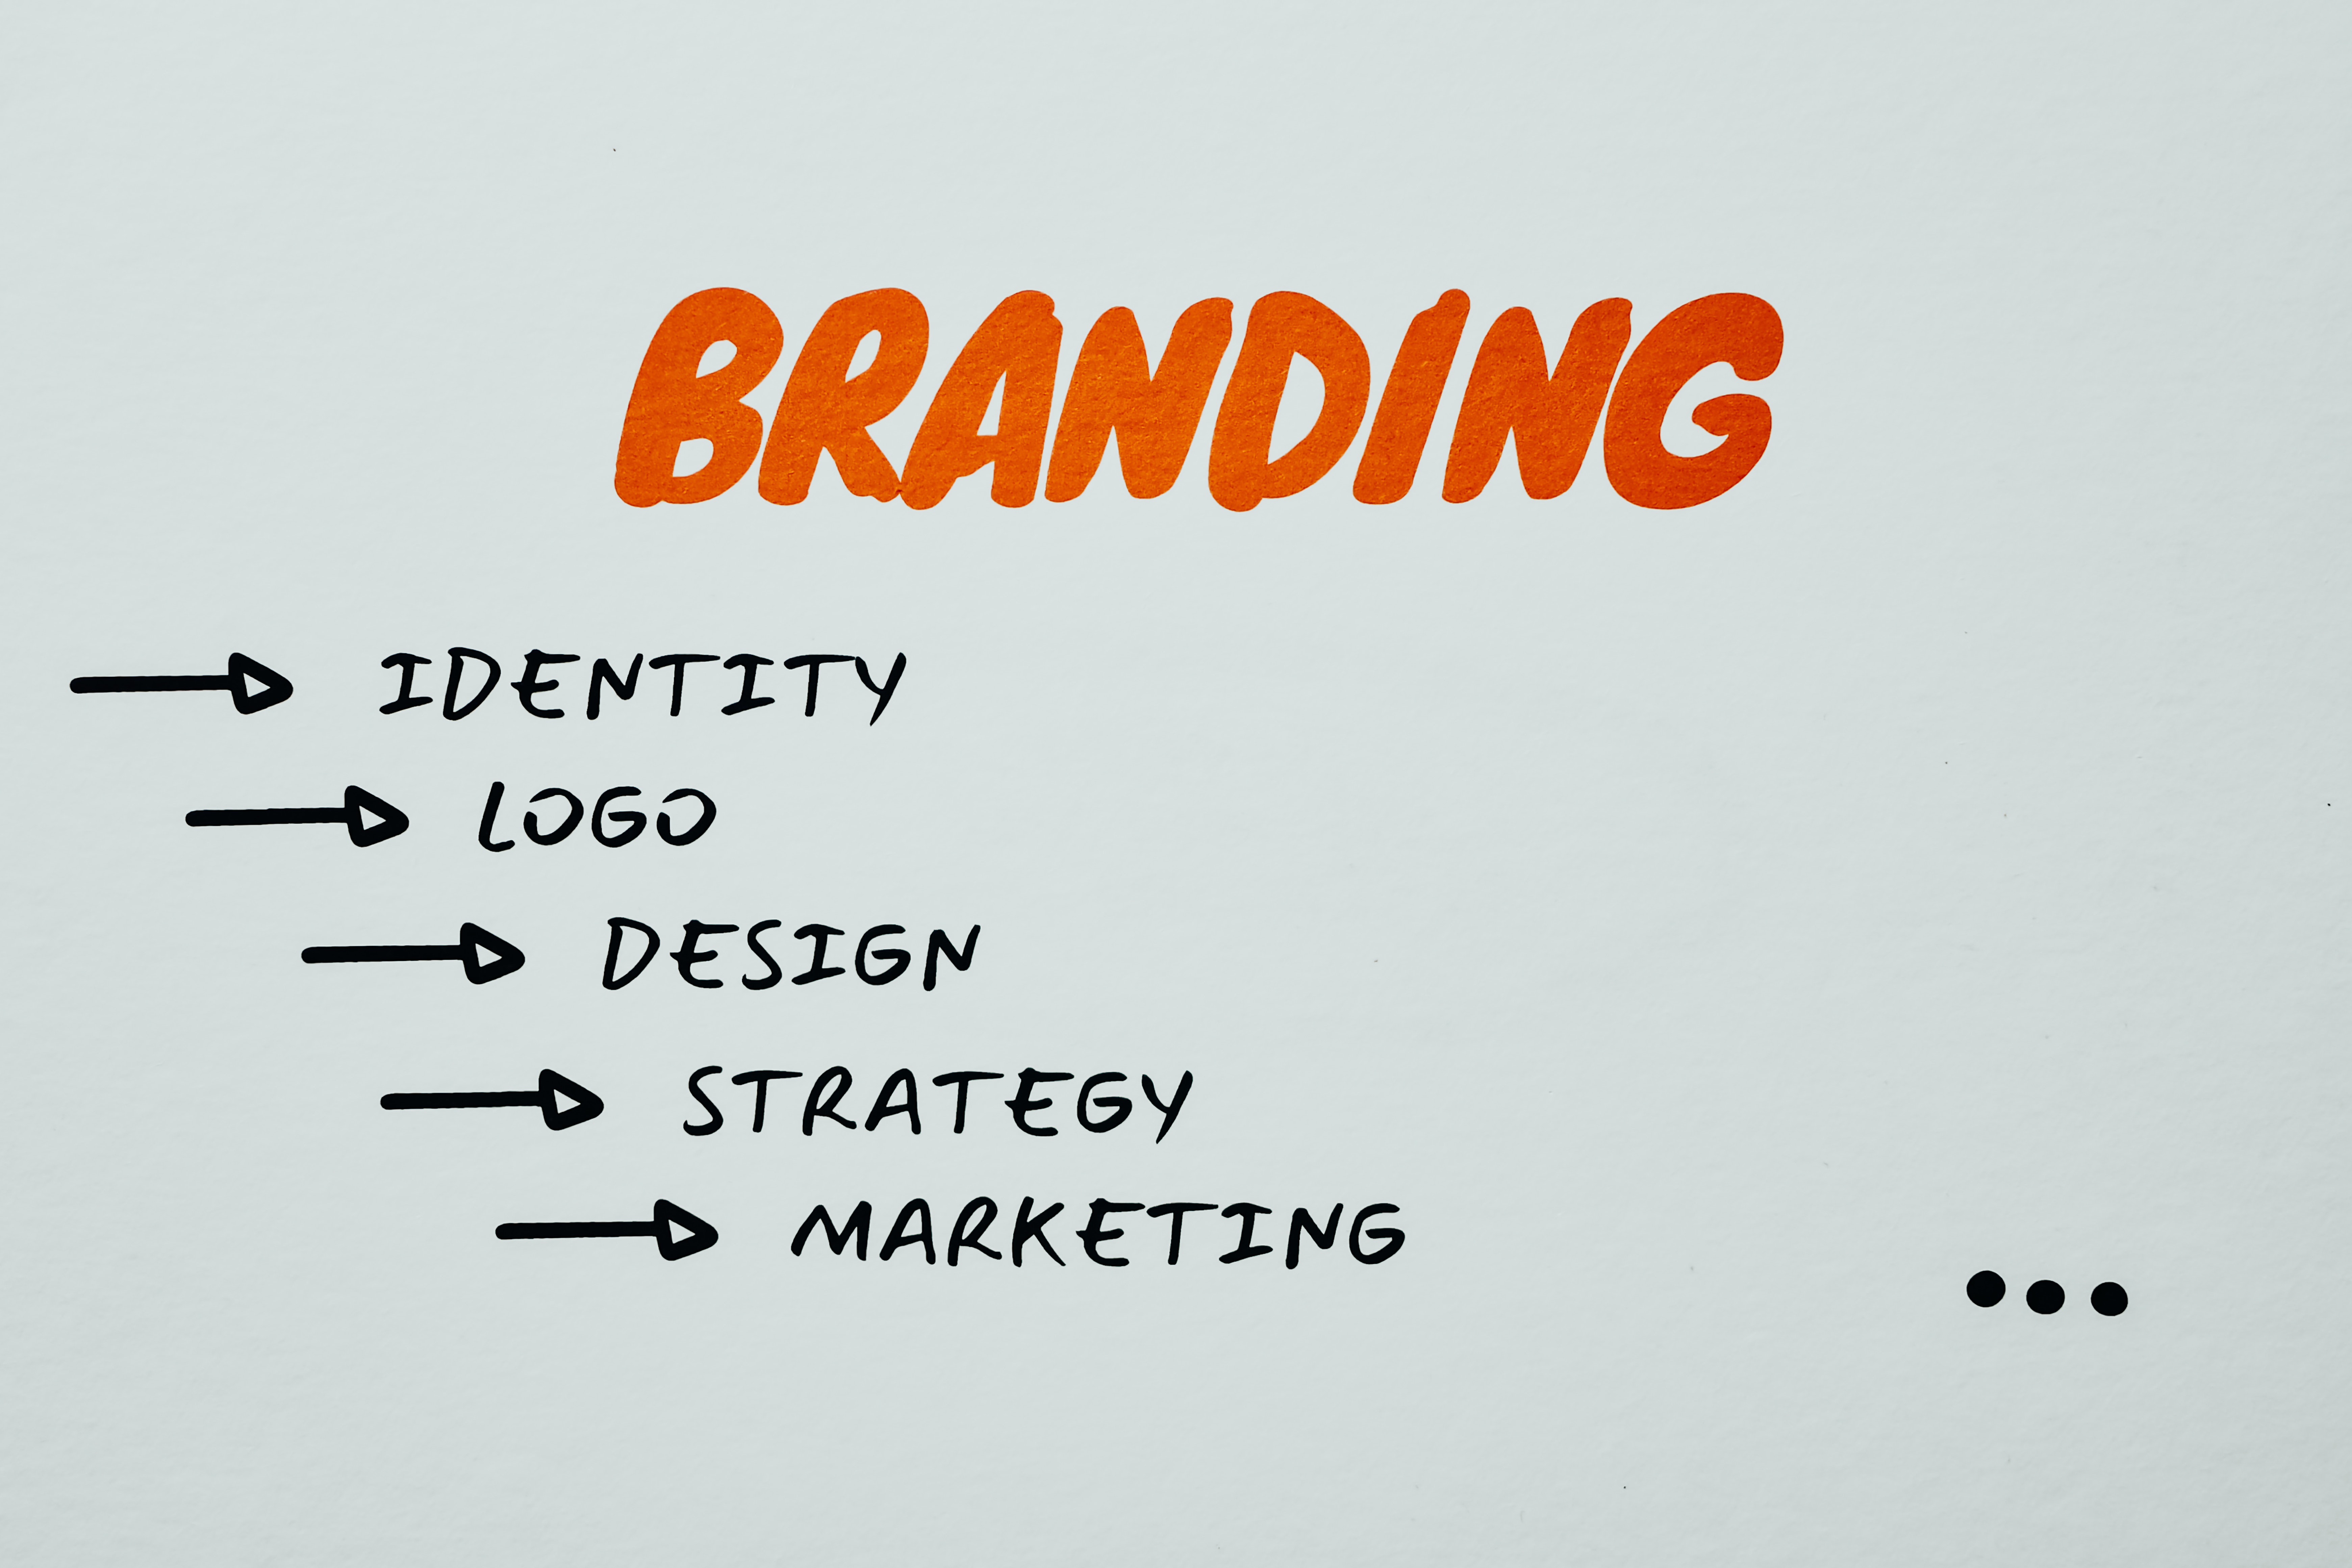 Image shows the word branding and underneath it "identity, logo, design, strategy, marketing".